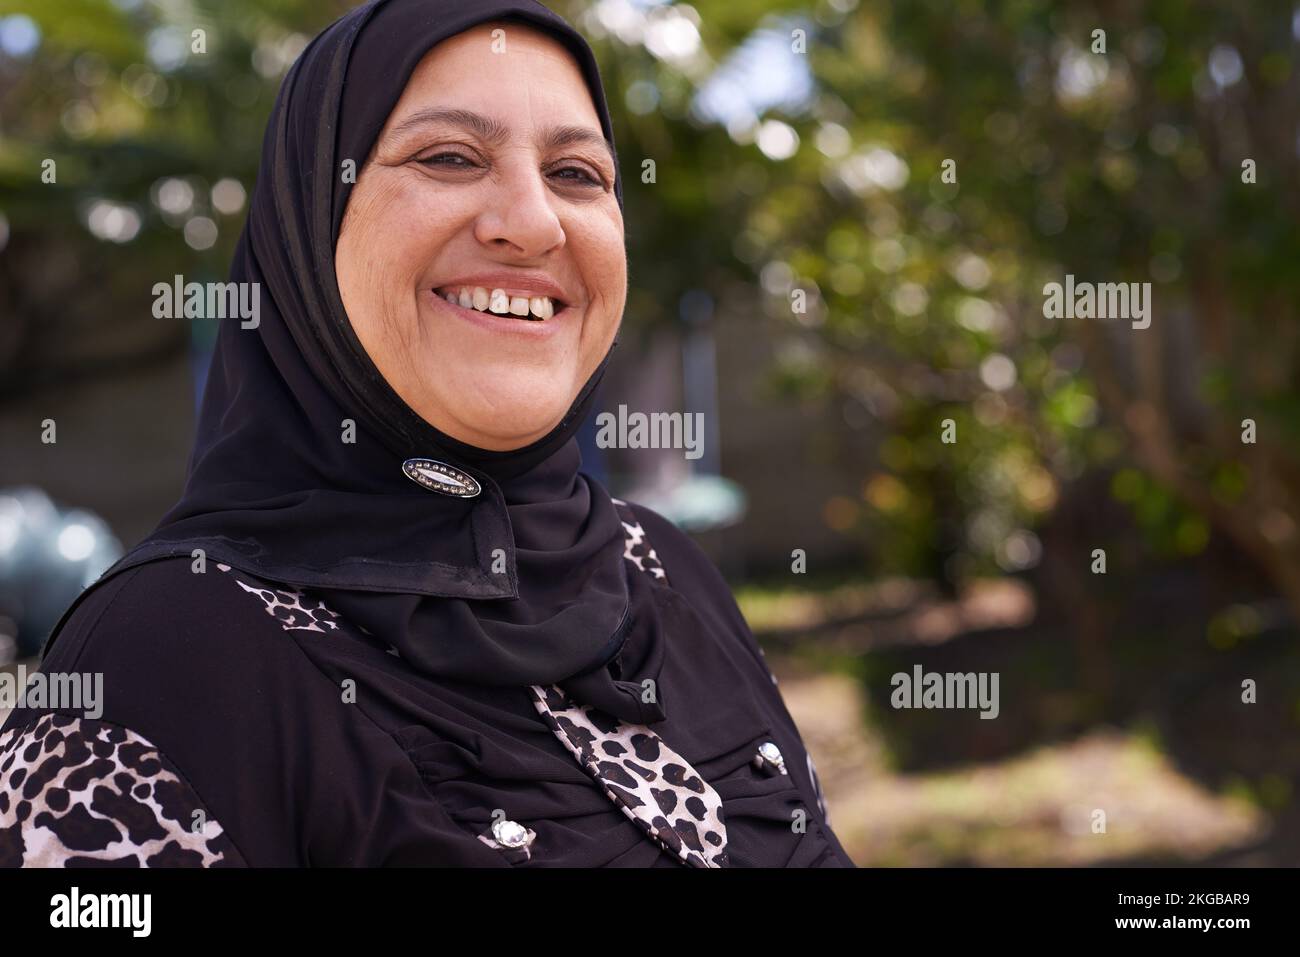 Living and laughing. Portrait of a mature muslim woman standing outside. Stock Photo